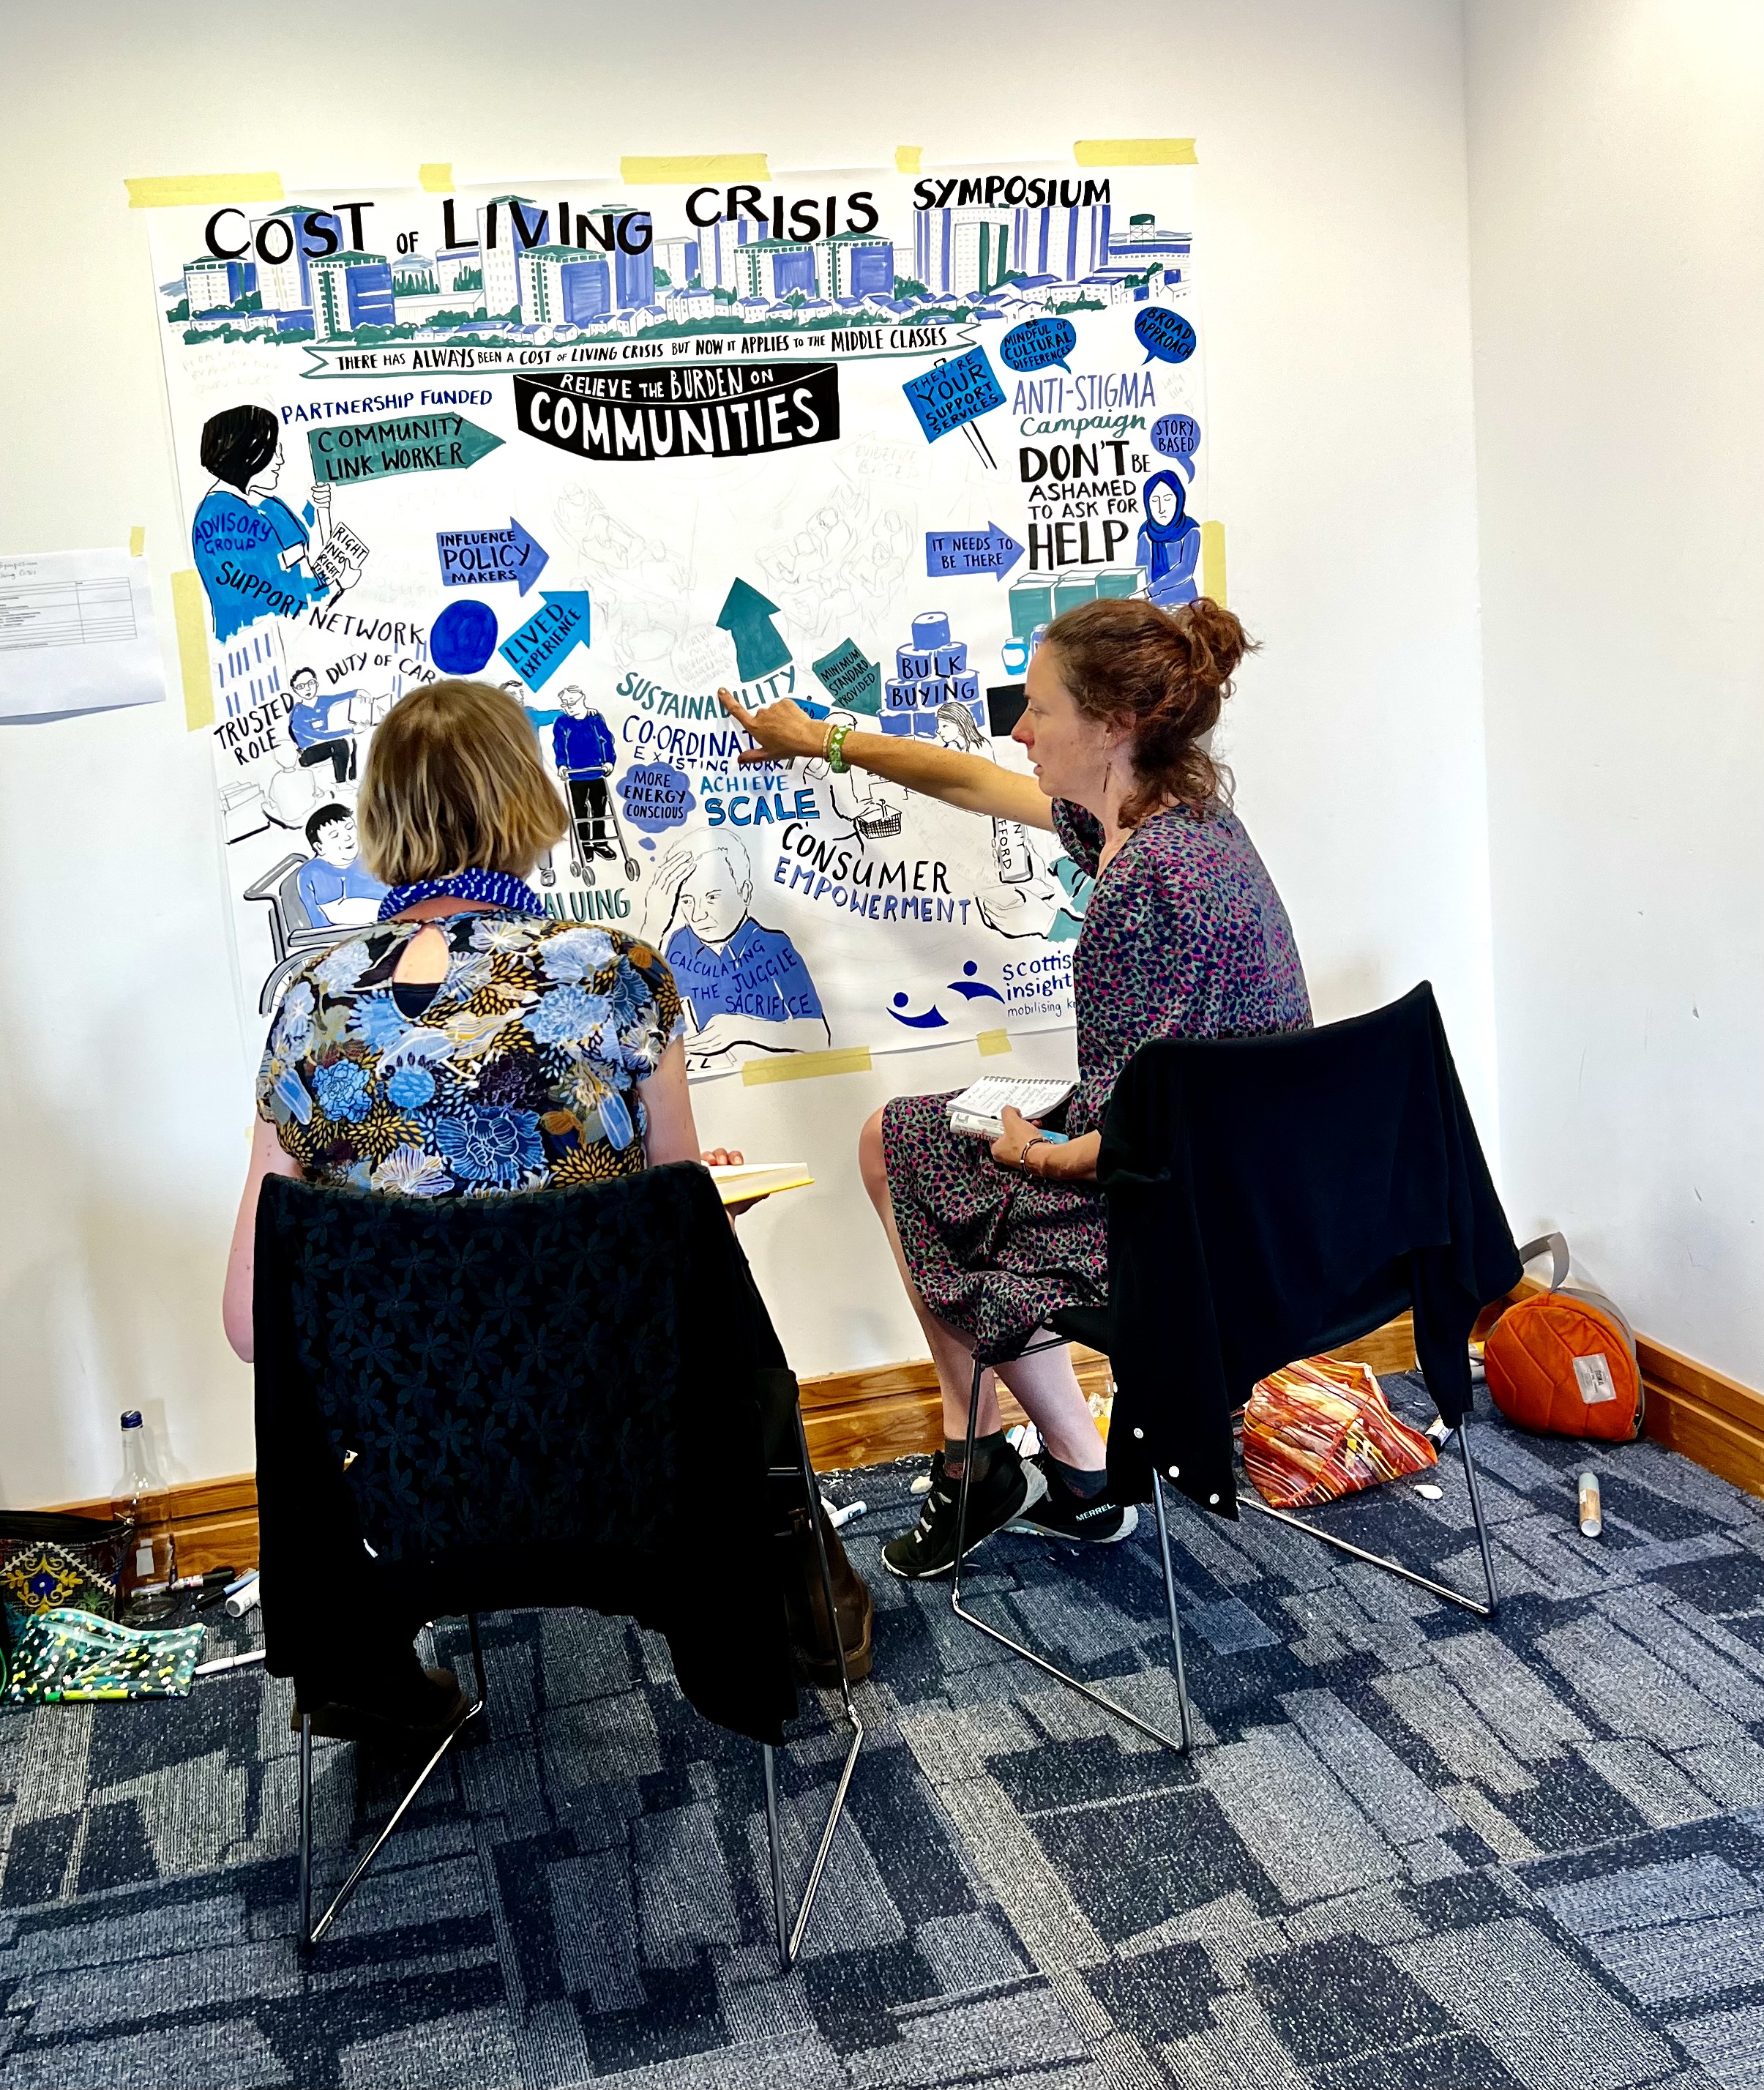 Two artists are sitting facing a large sheet of paper on the wall, showing a work in progress of their illustration.